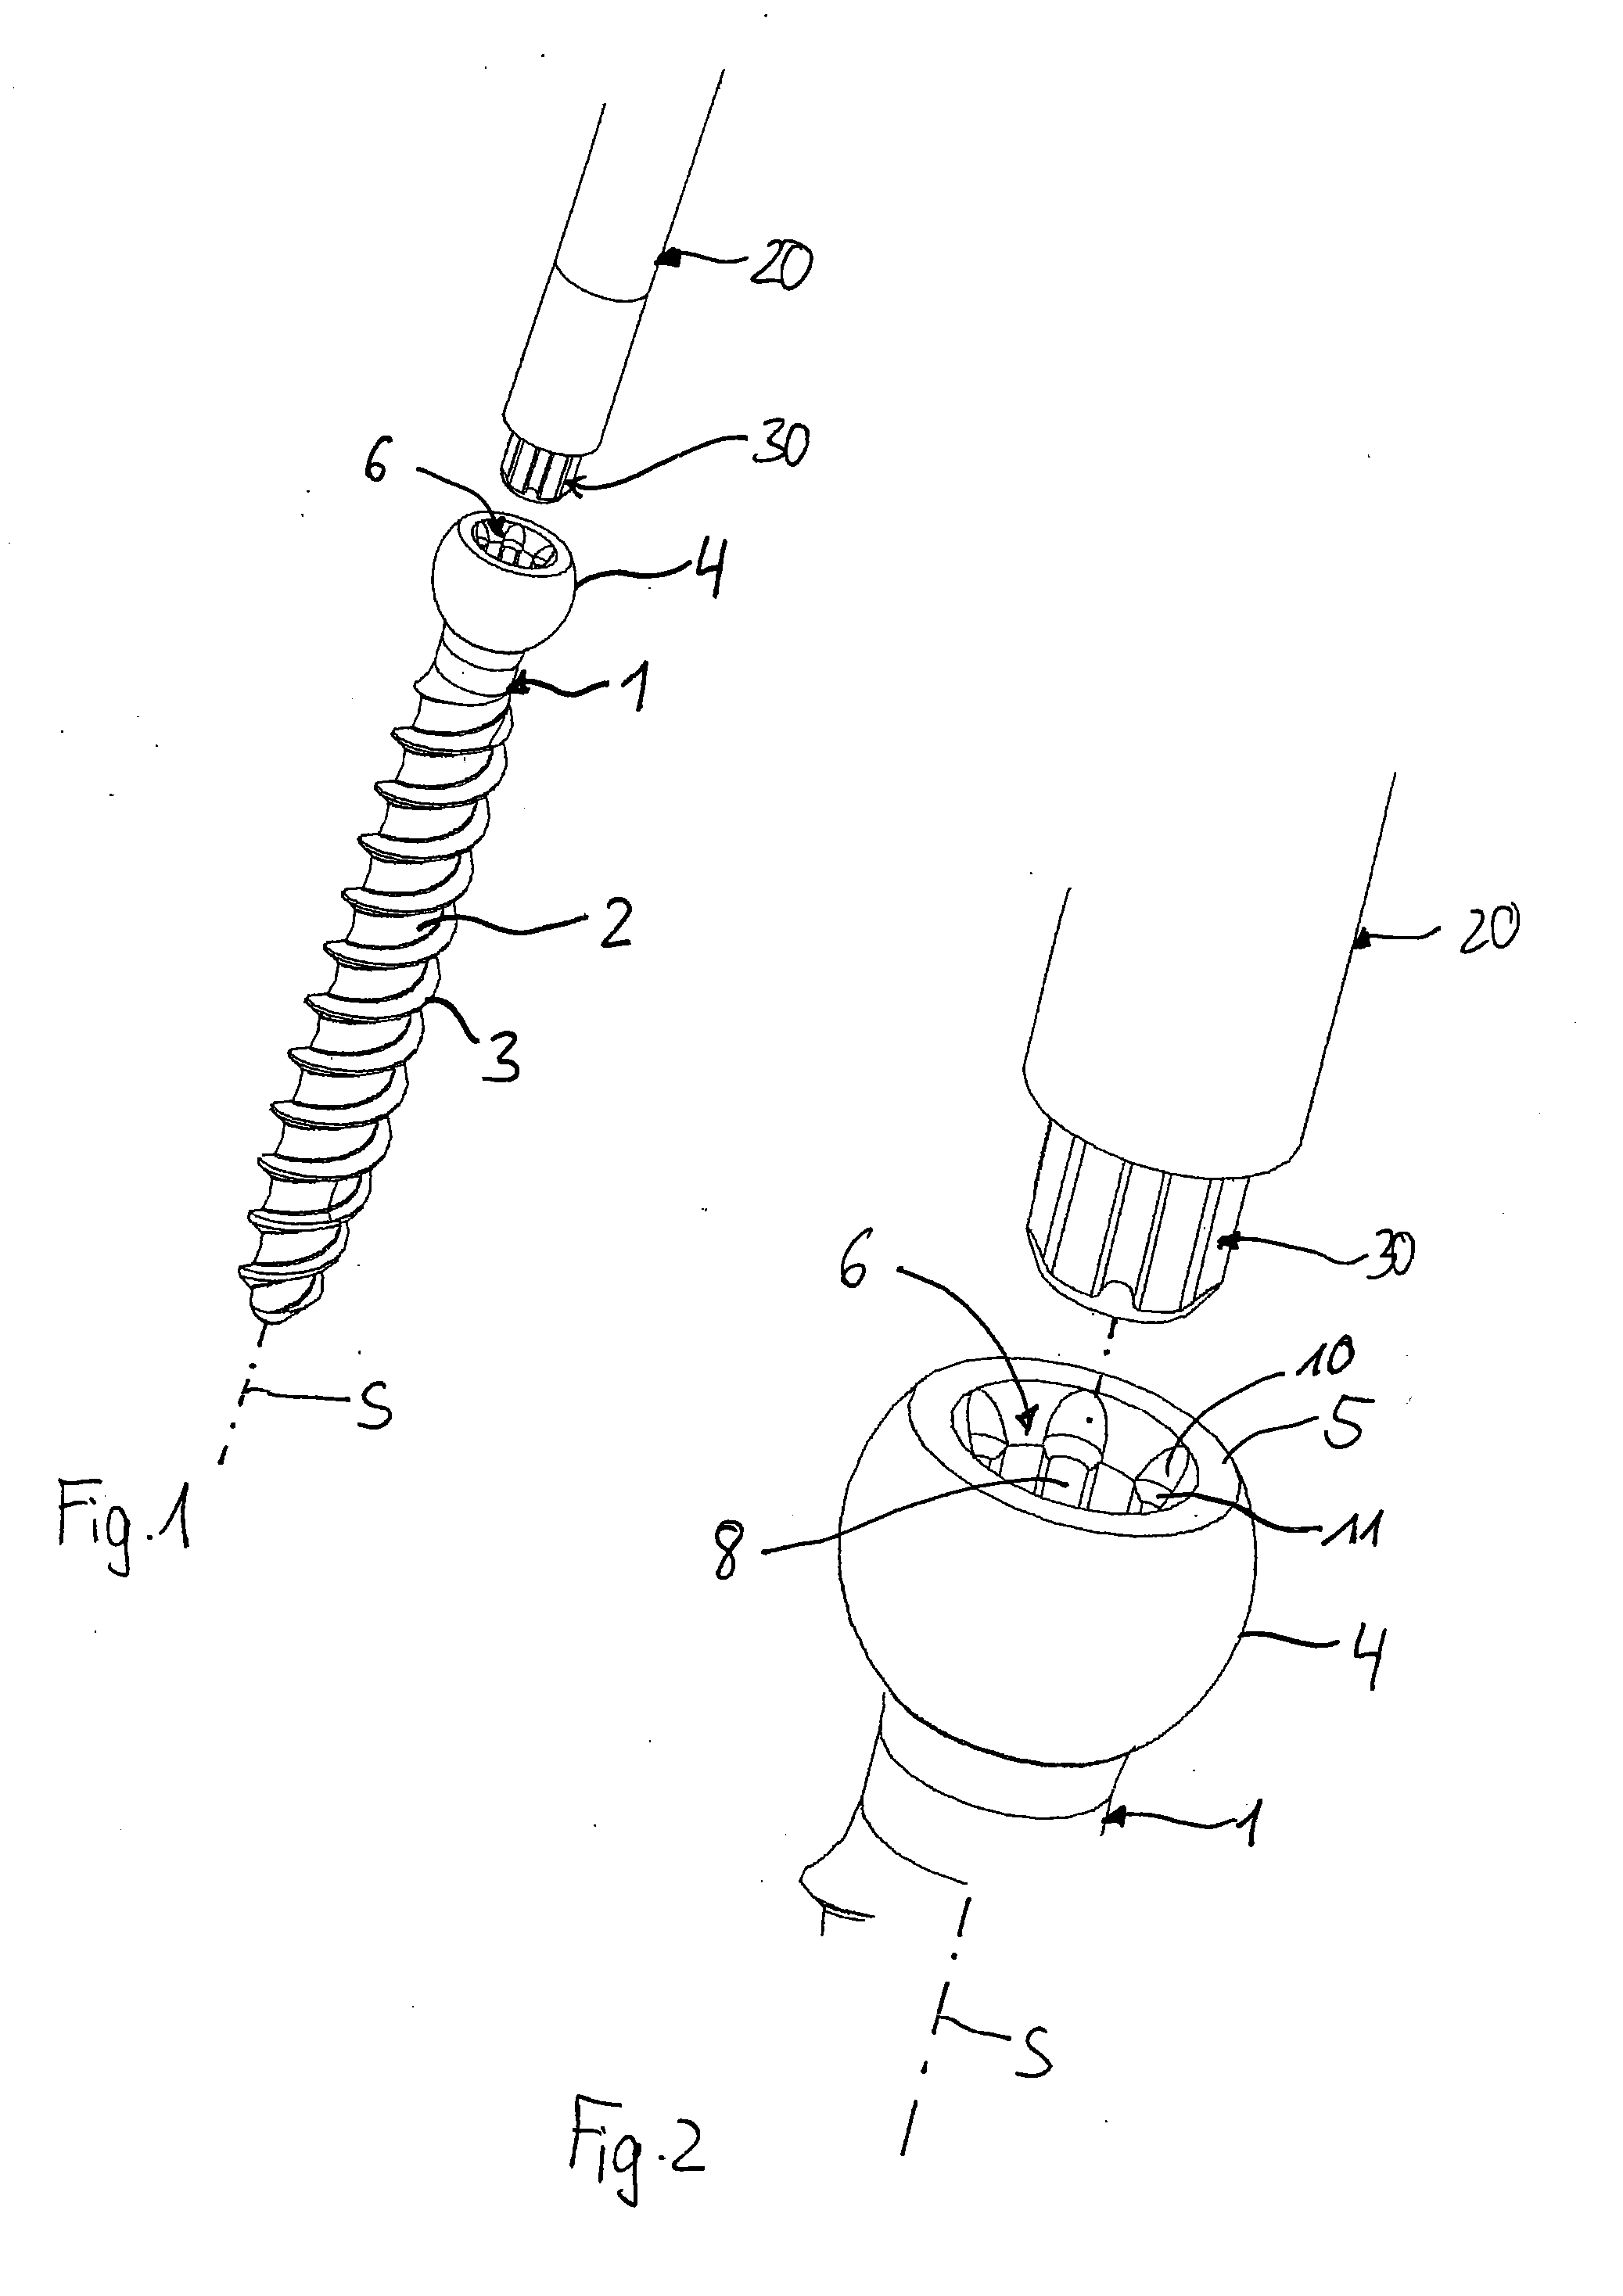 Screw element for use in spinal, orthopedic or trauma surgery and a system of such a screw element and a screw driver adapted thereto